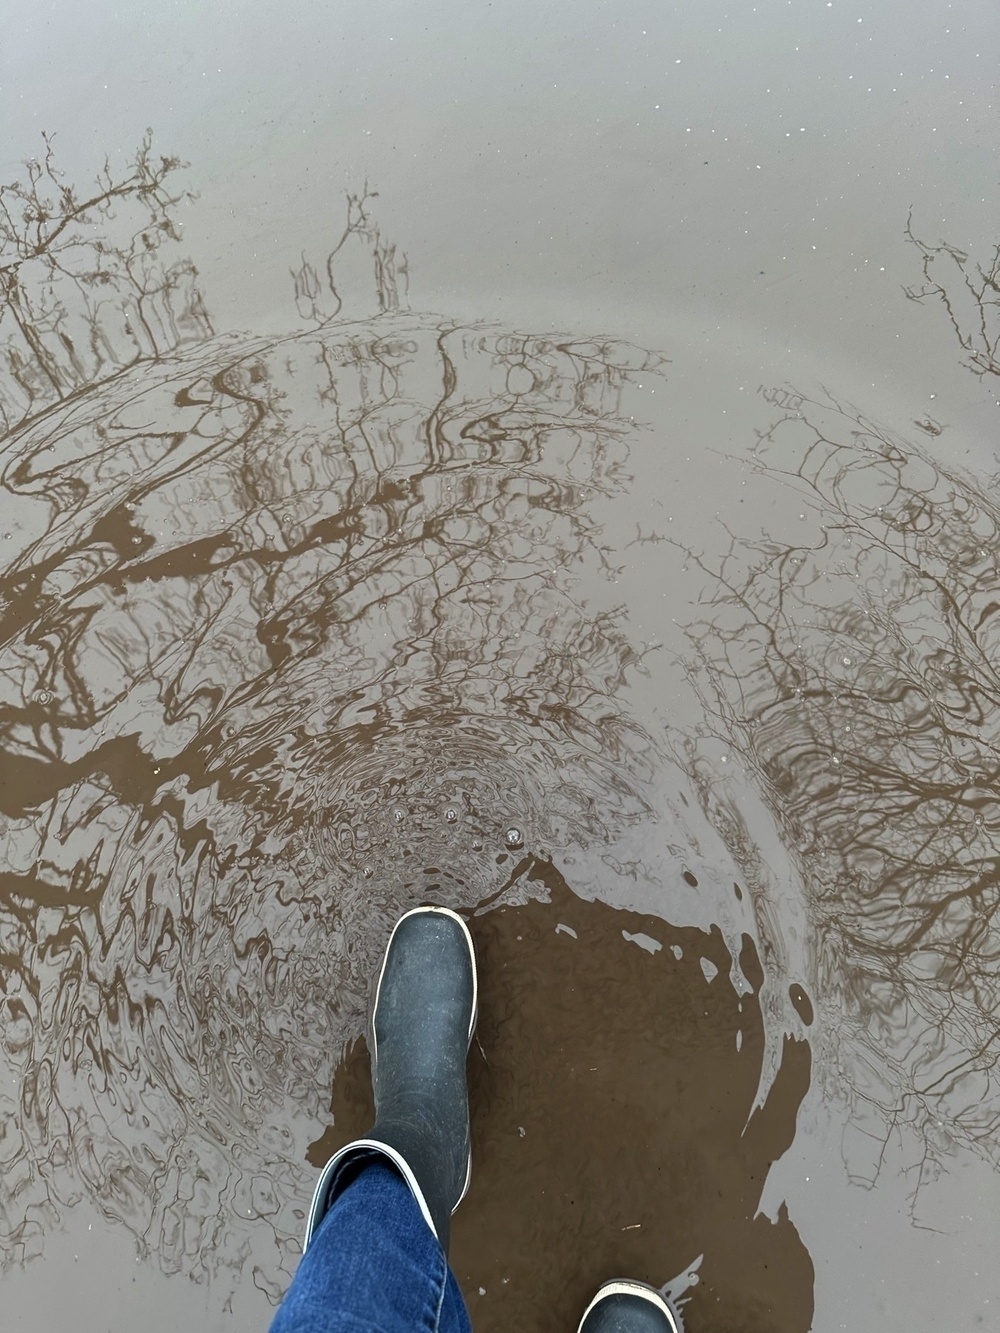 rubber boots, muddy puddle reflecting an umbrella and a tree